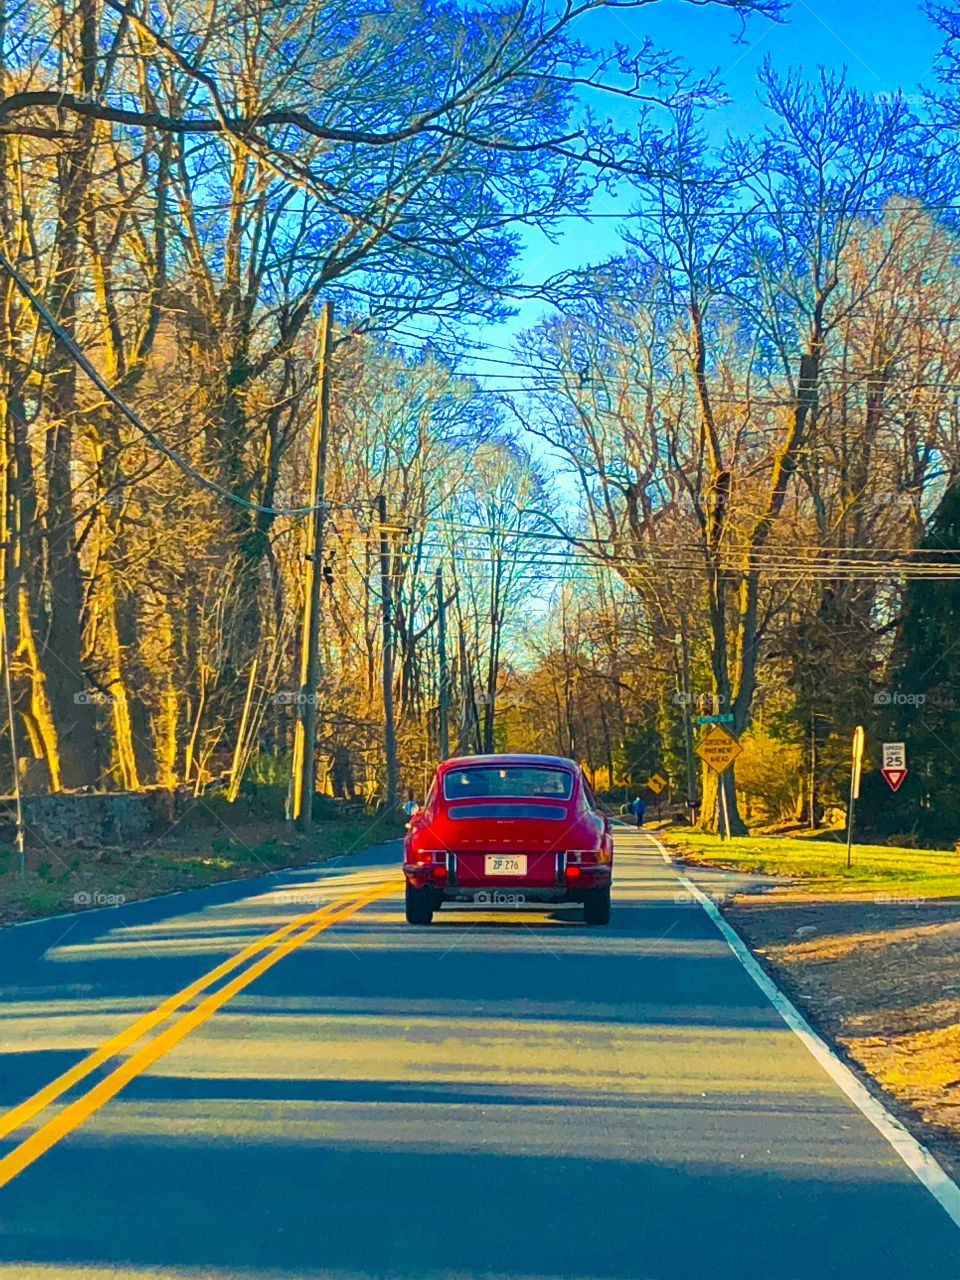 1960’s Porsche cruising down the backroads on a beautiful fall day